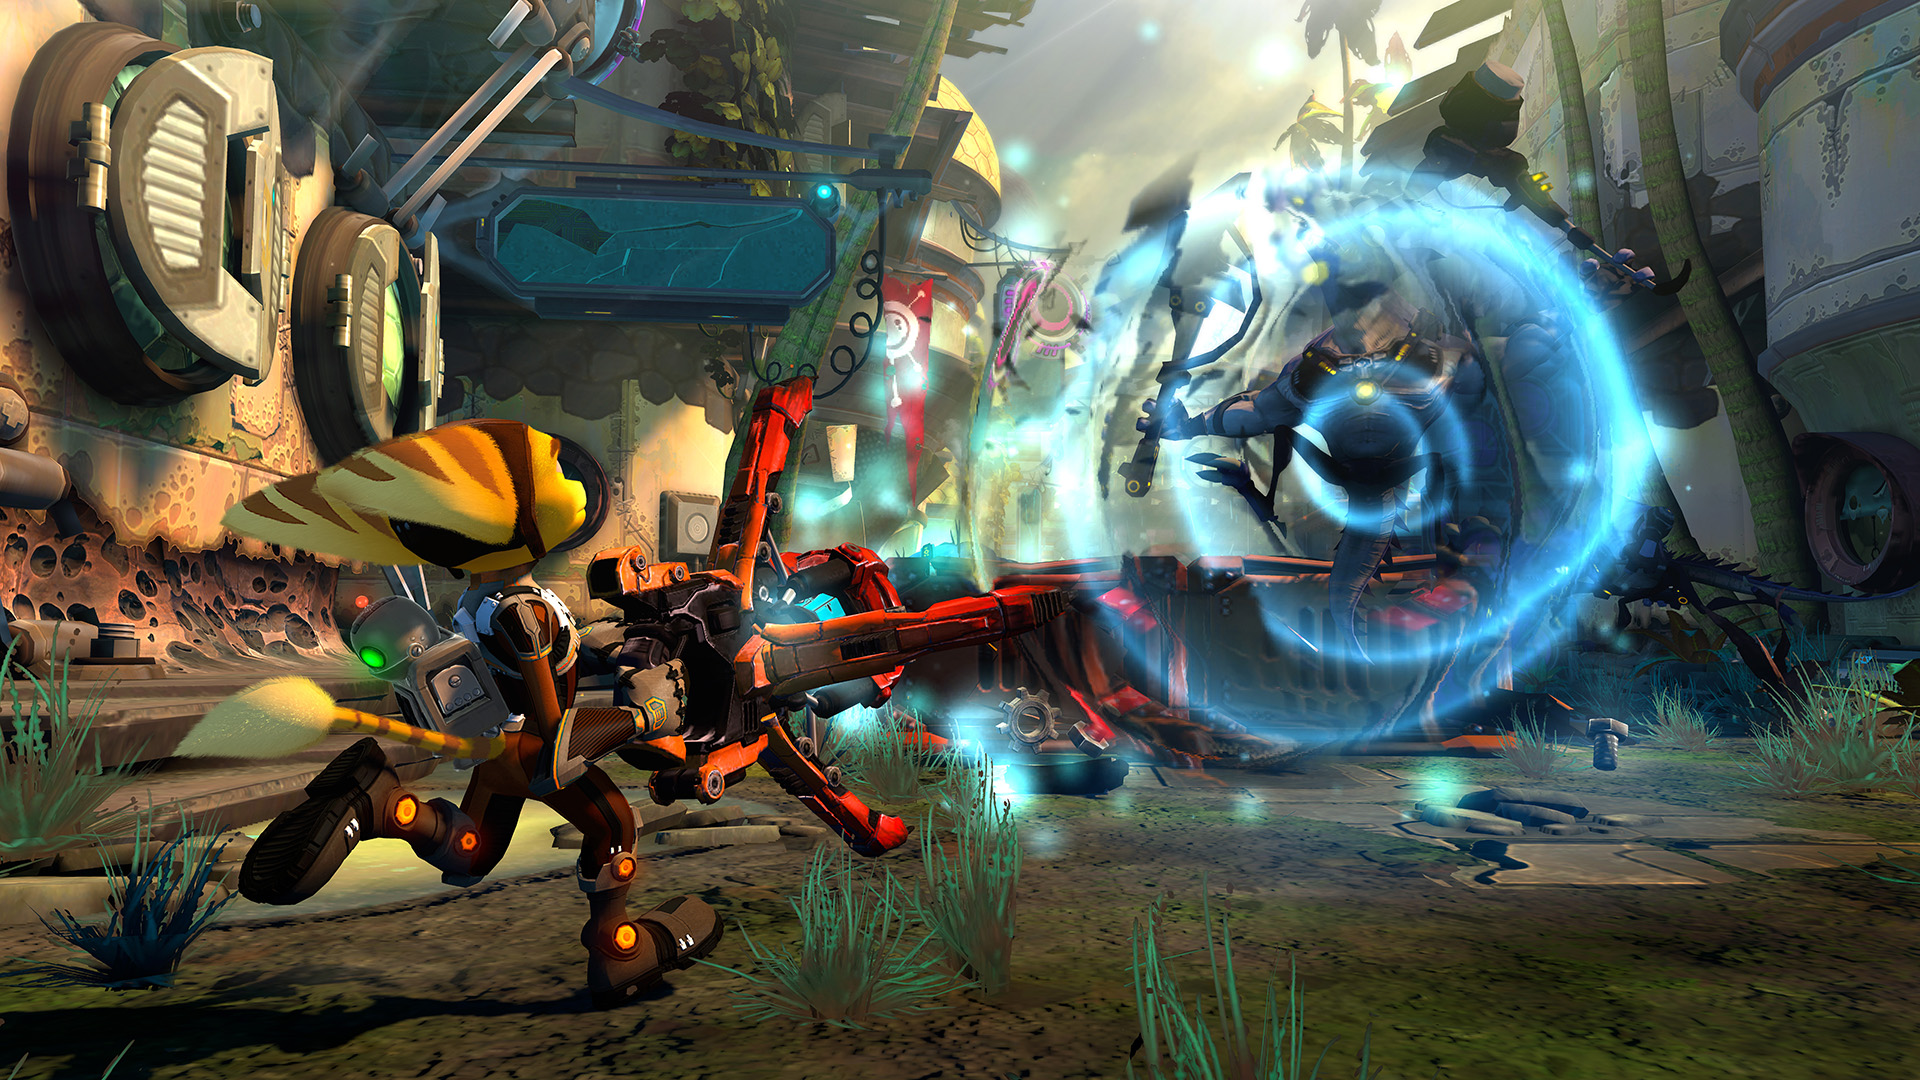 Ratchet & Clank returning to PS3 with Nexus - NZ Herald